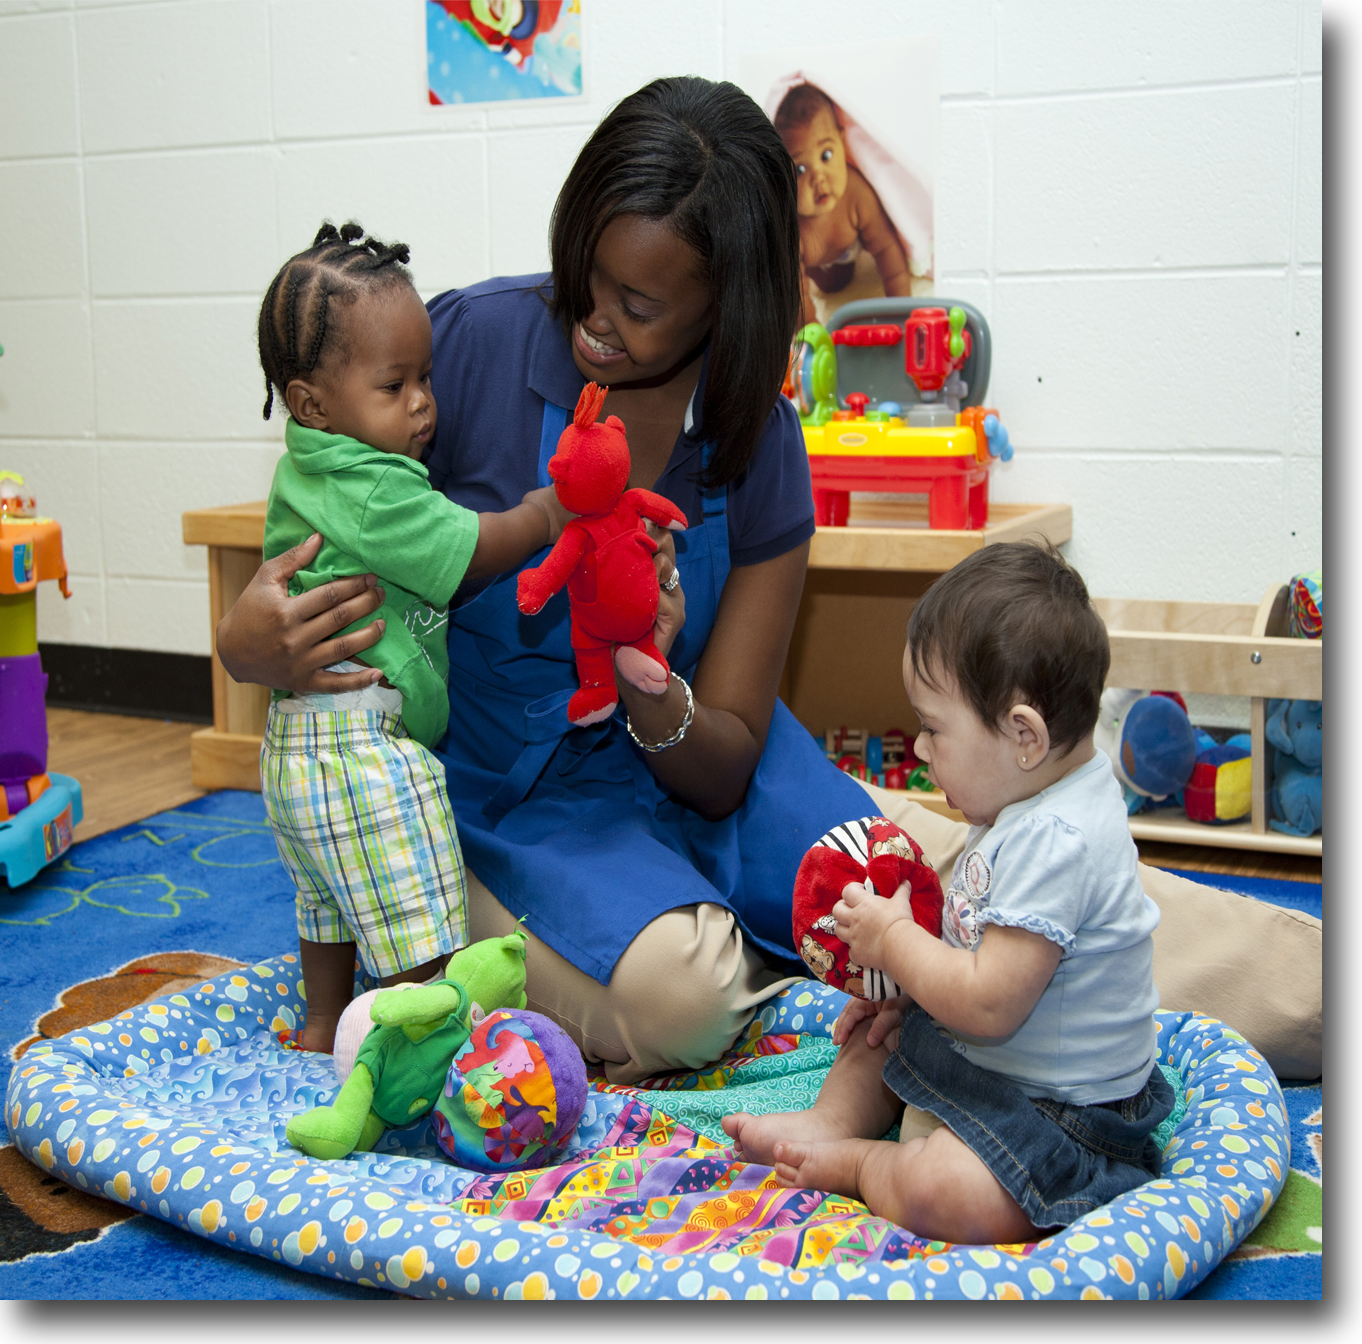 Essential aspects of a daycare